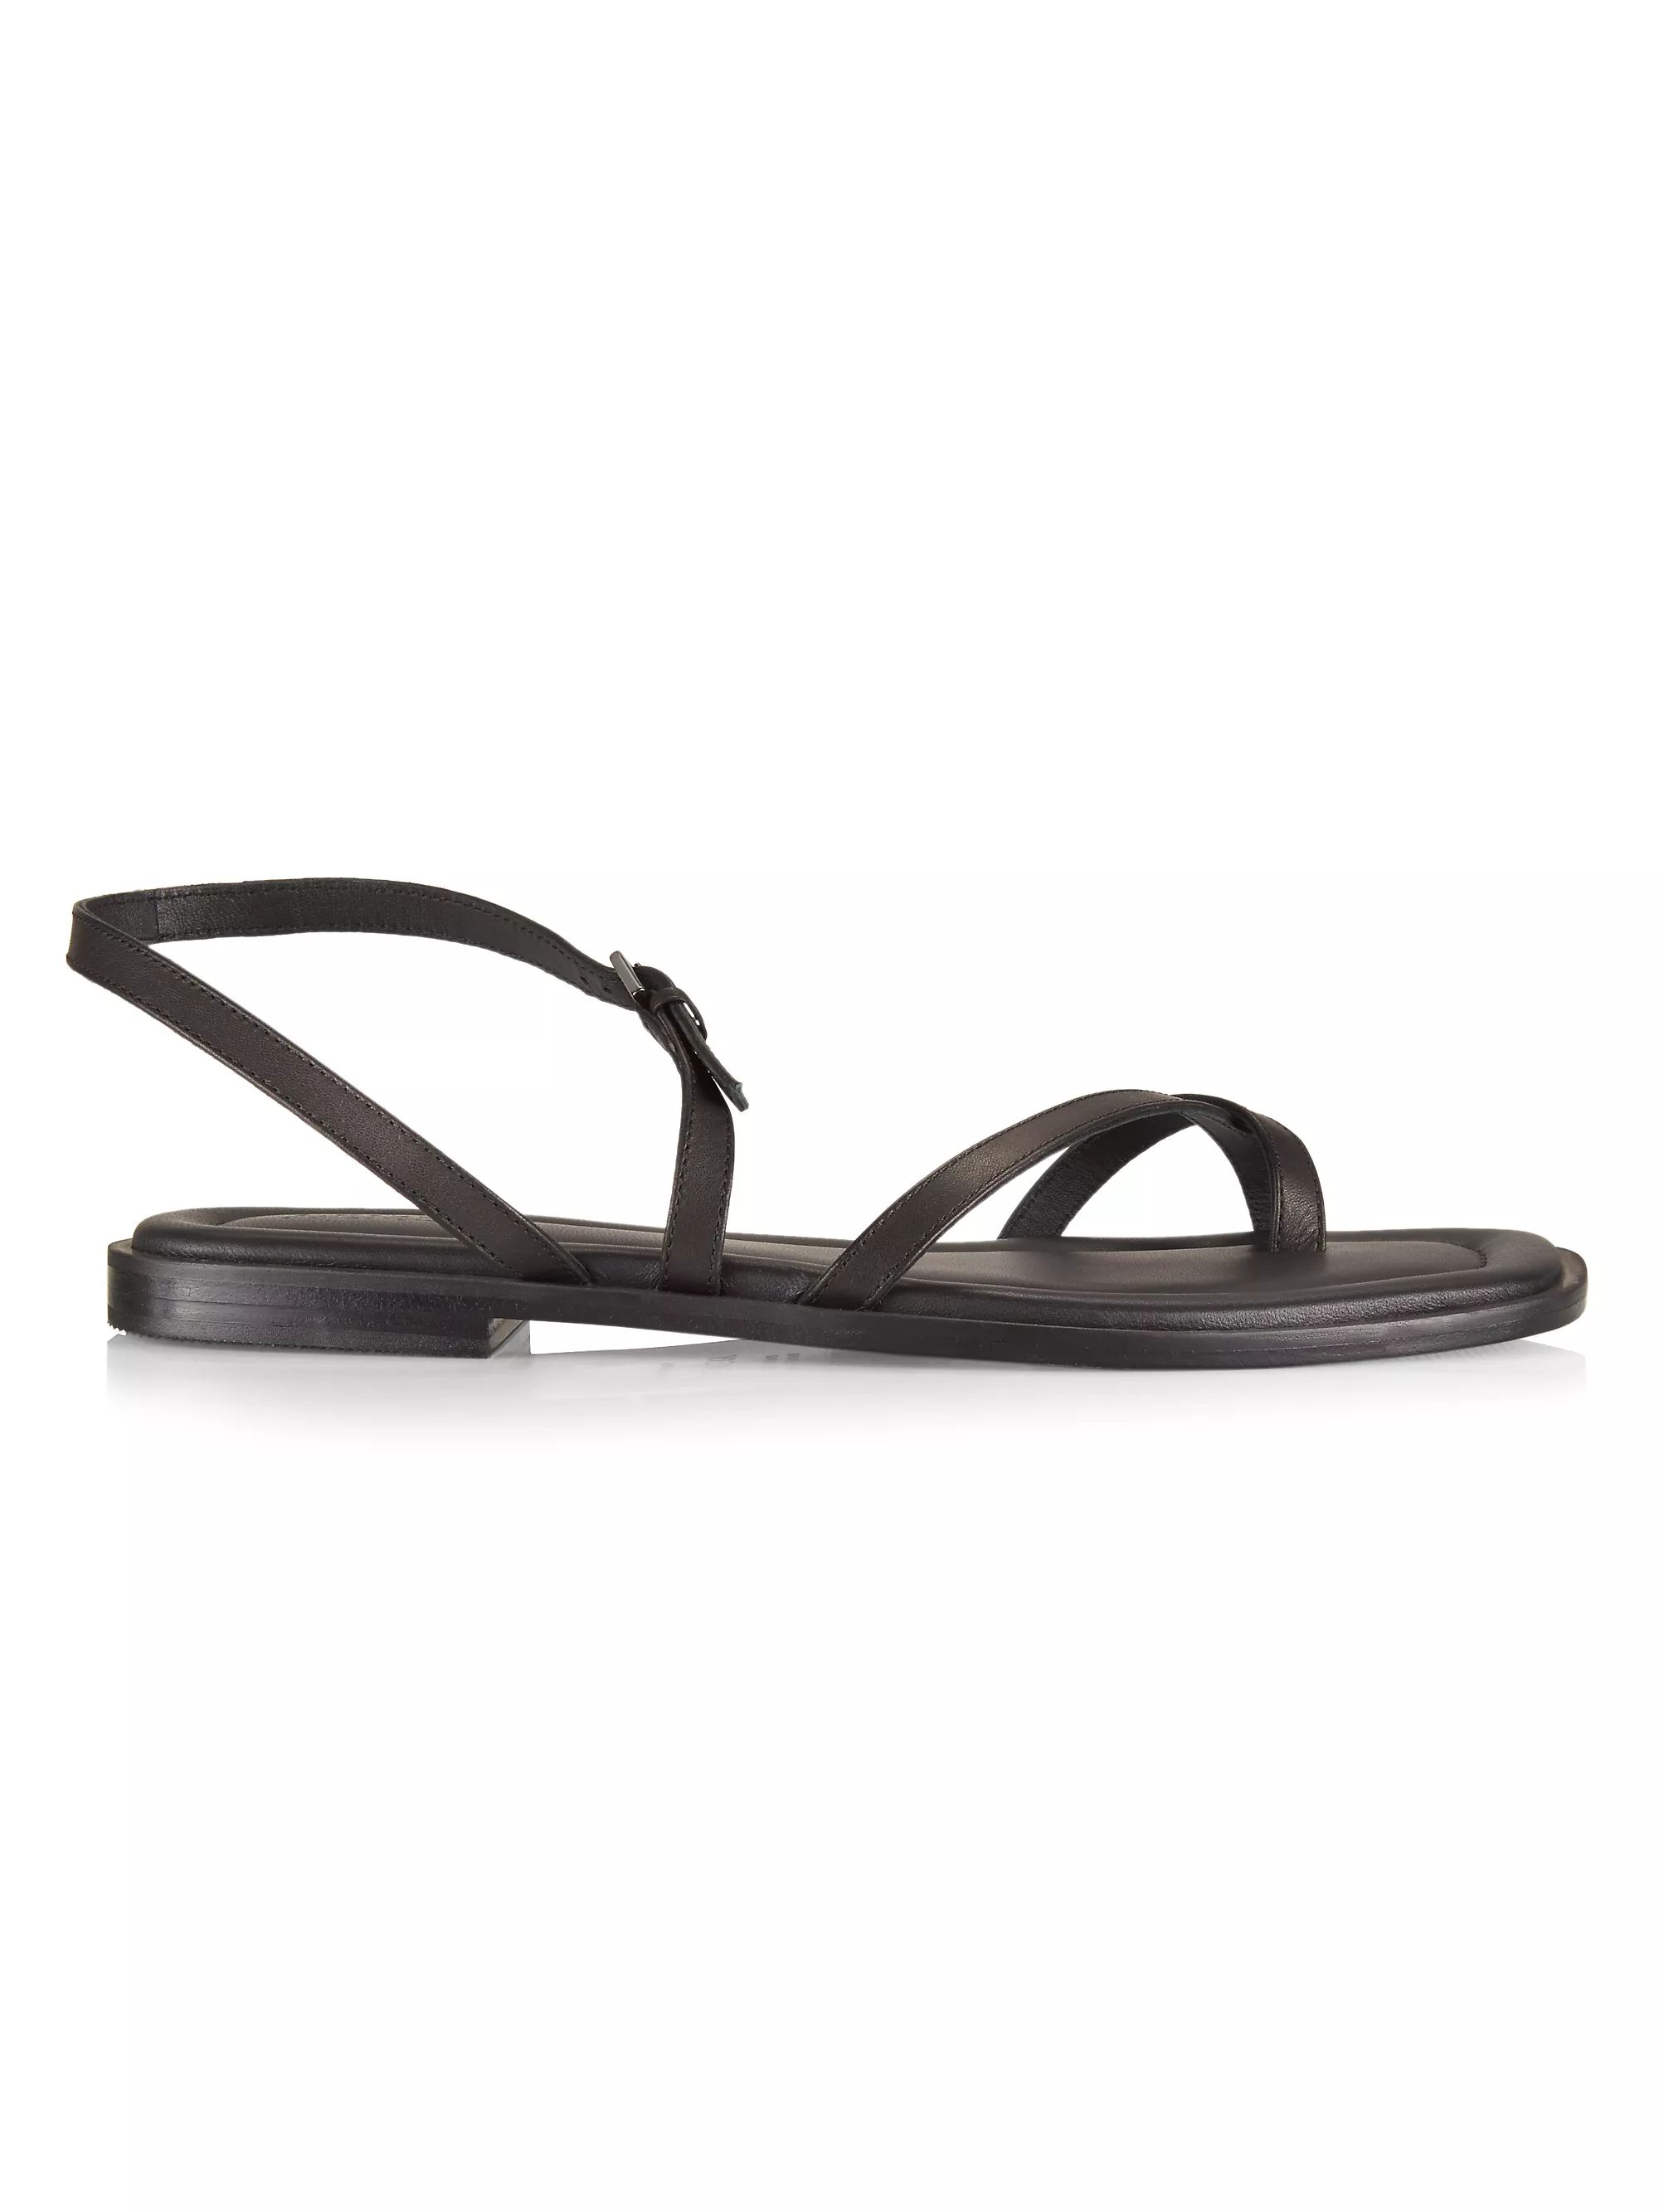 Lucia Leather Sandals | Saks Fifth Avenue